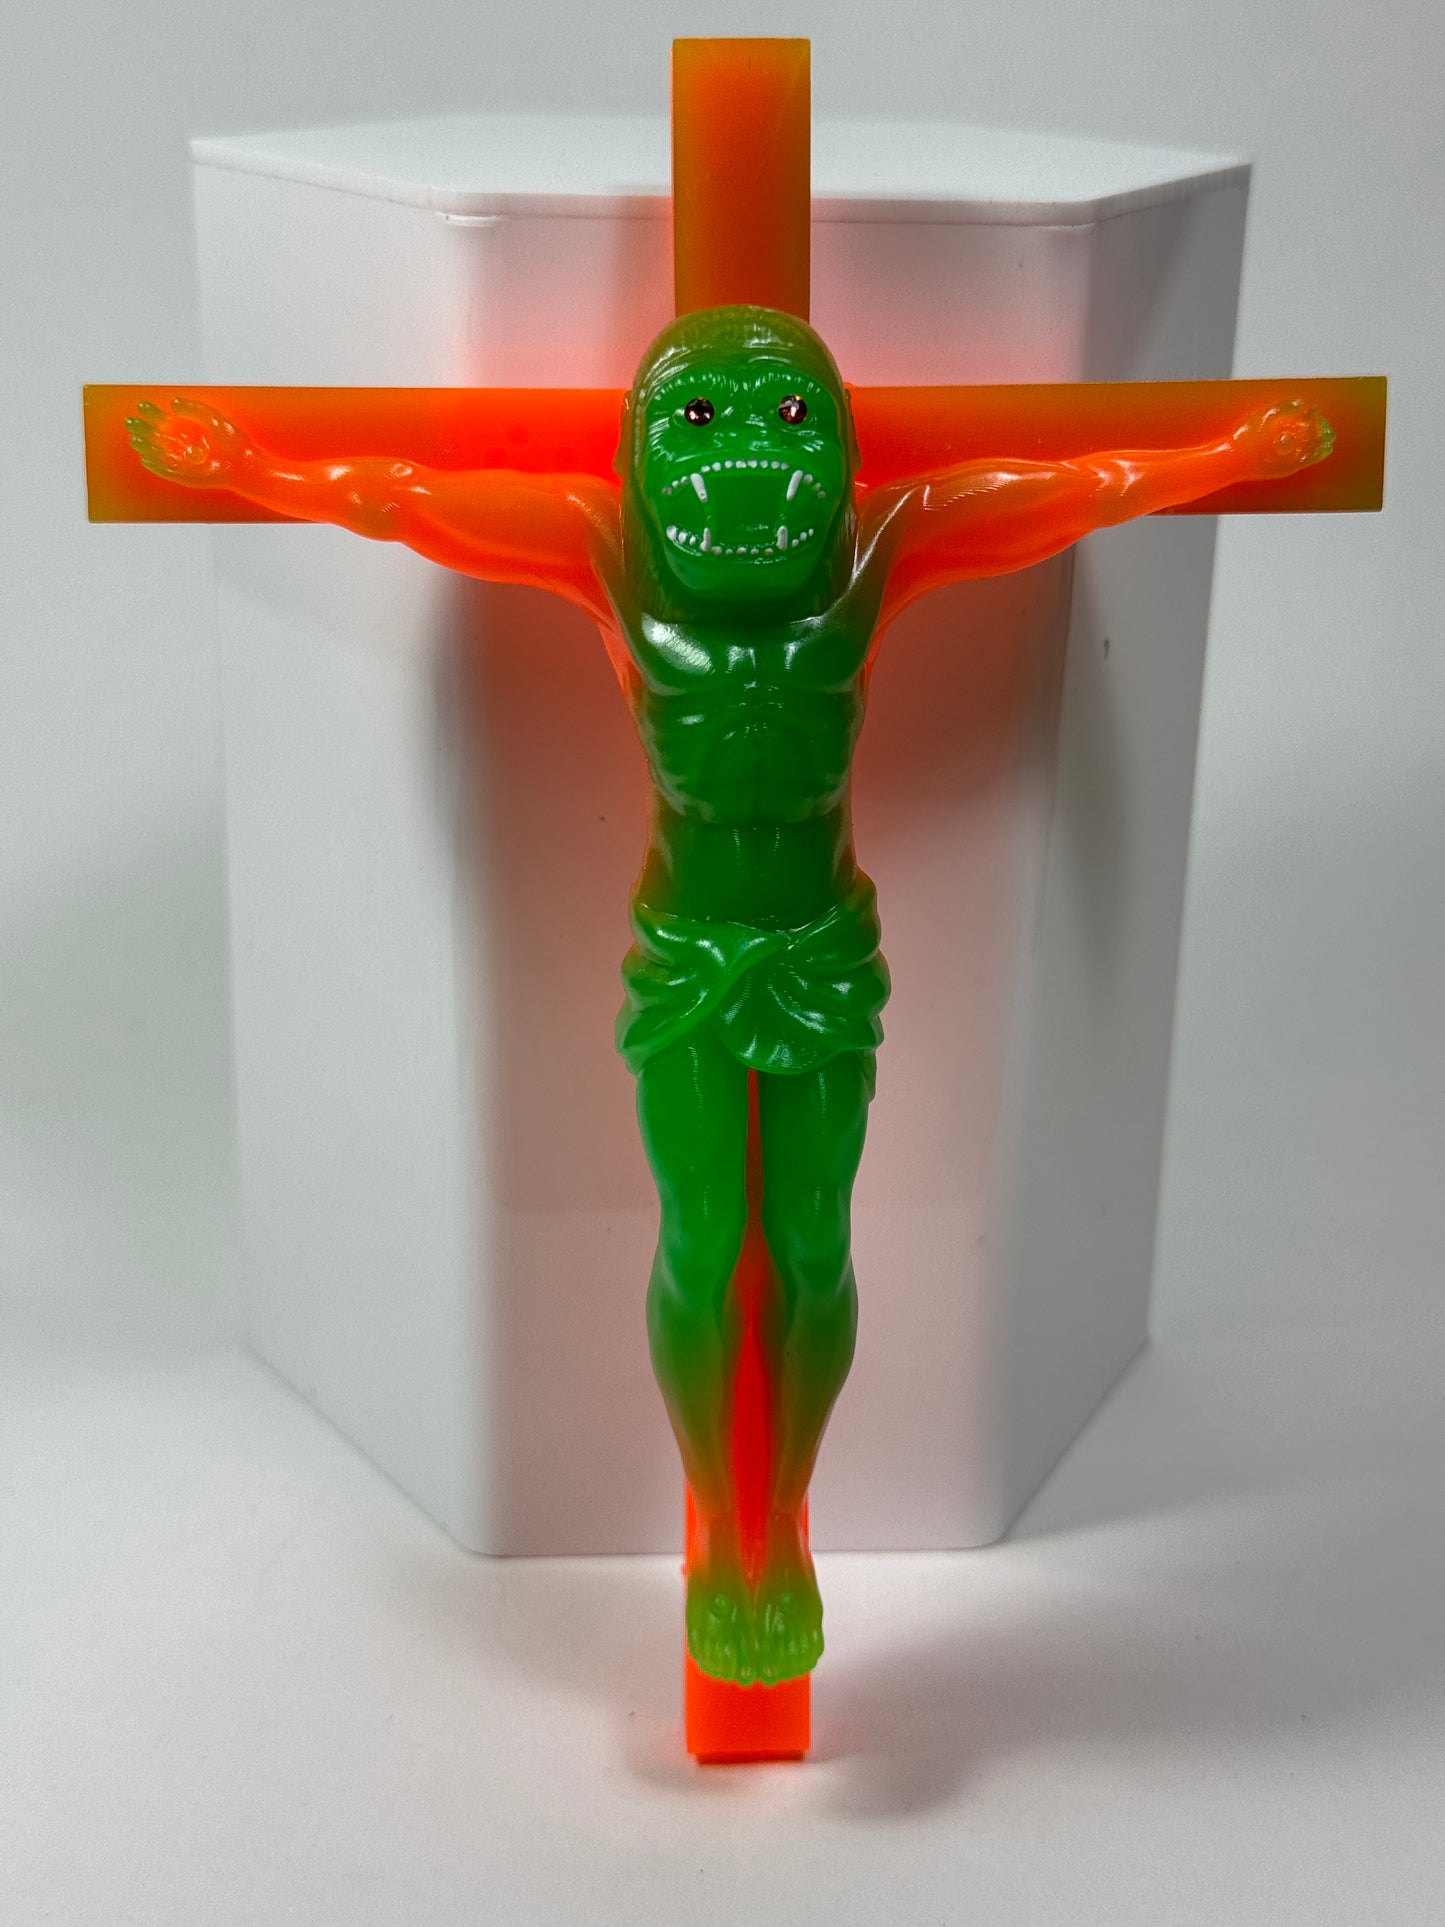 Christ on the Cross but he is an Ape, Magical Toy: Everlasting Peace